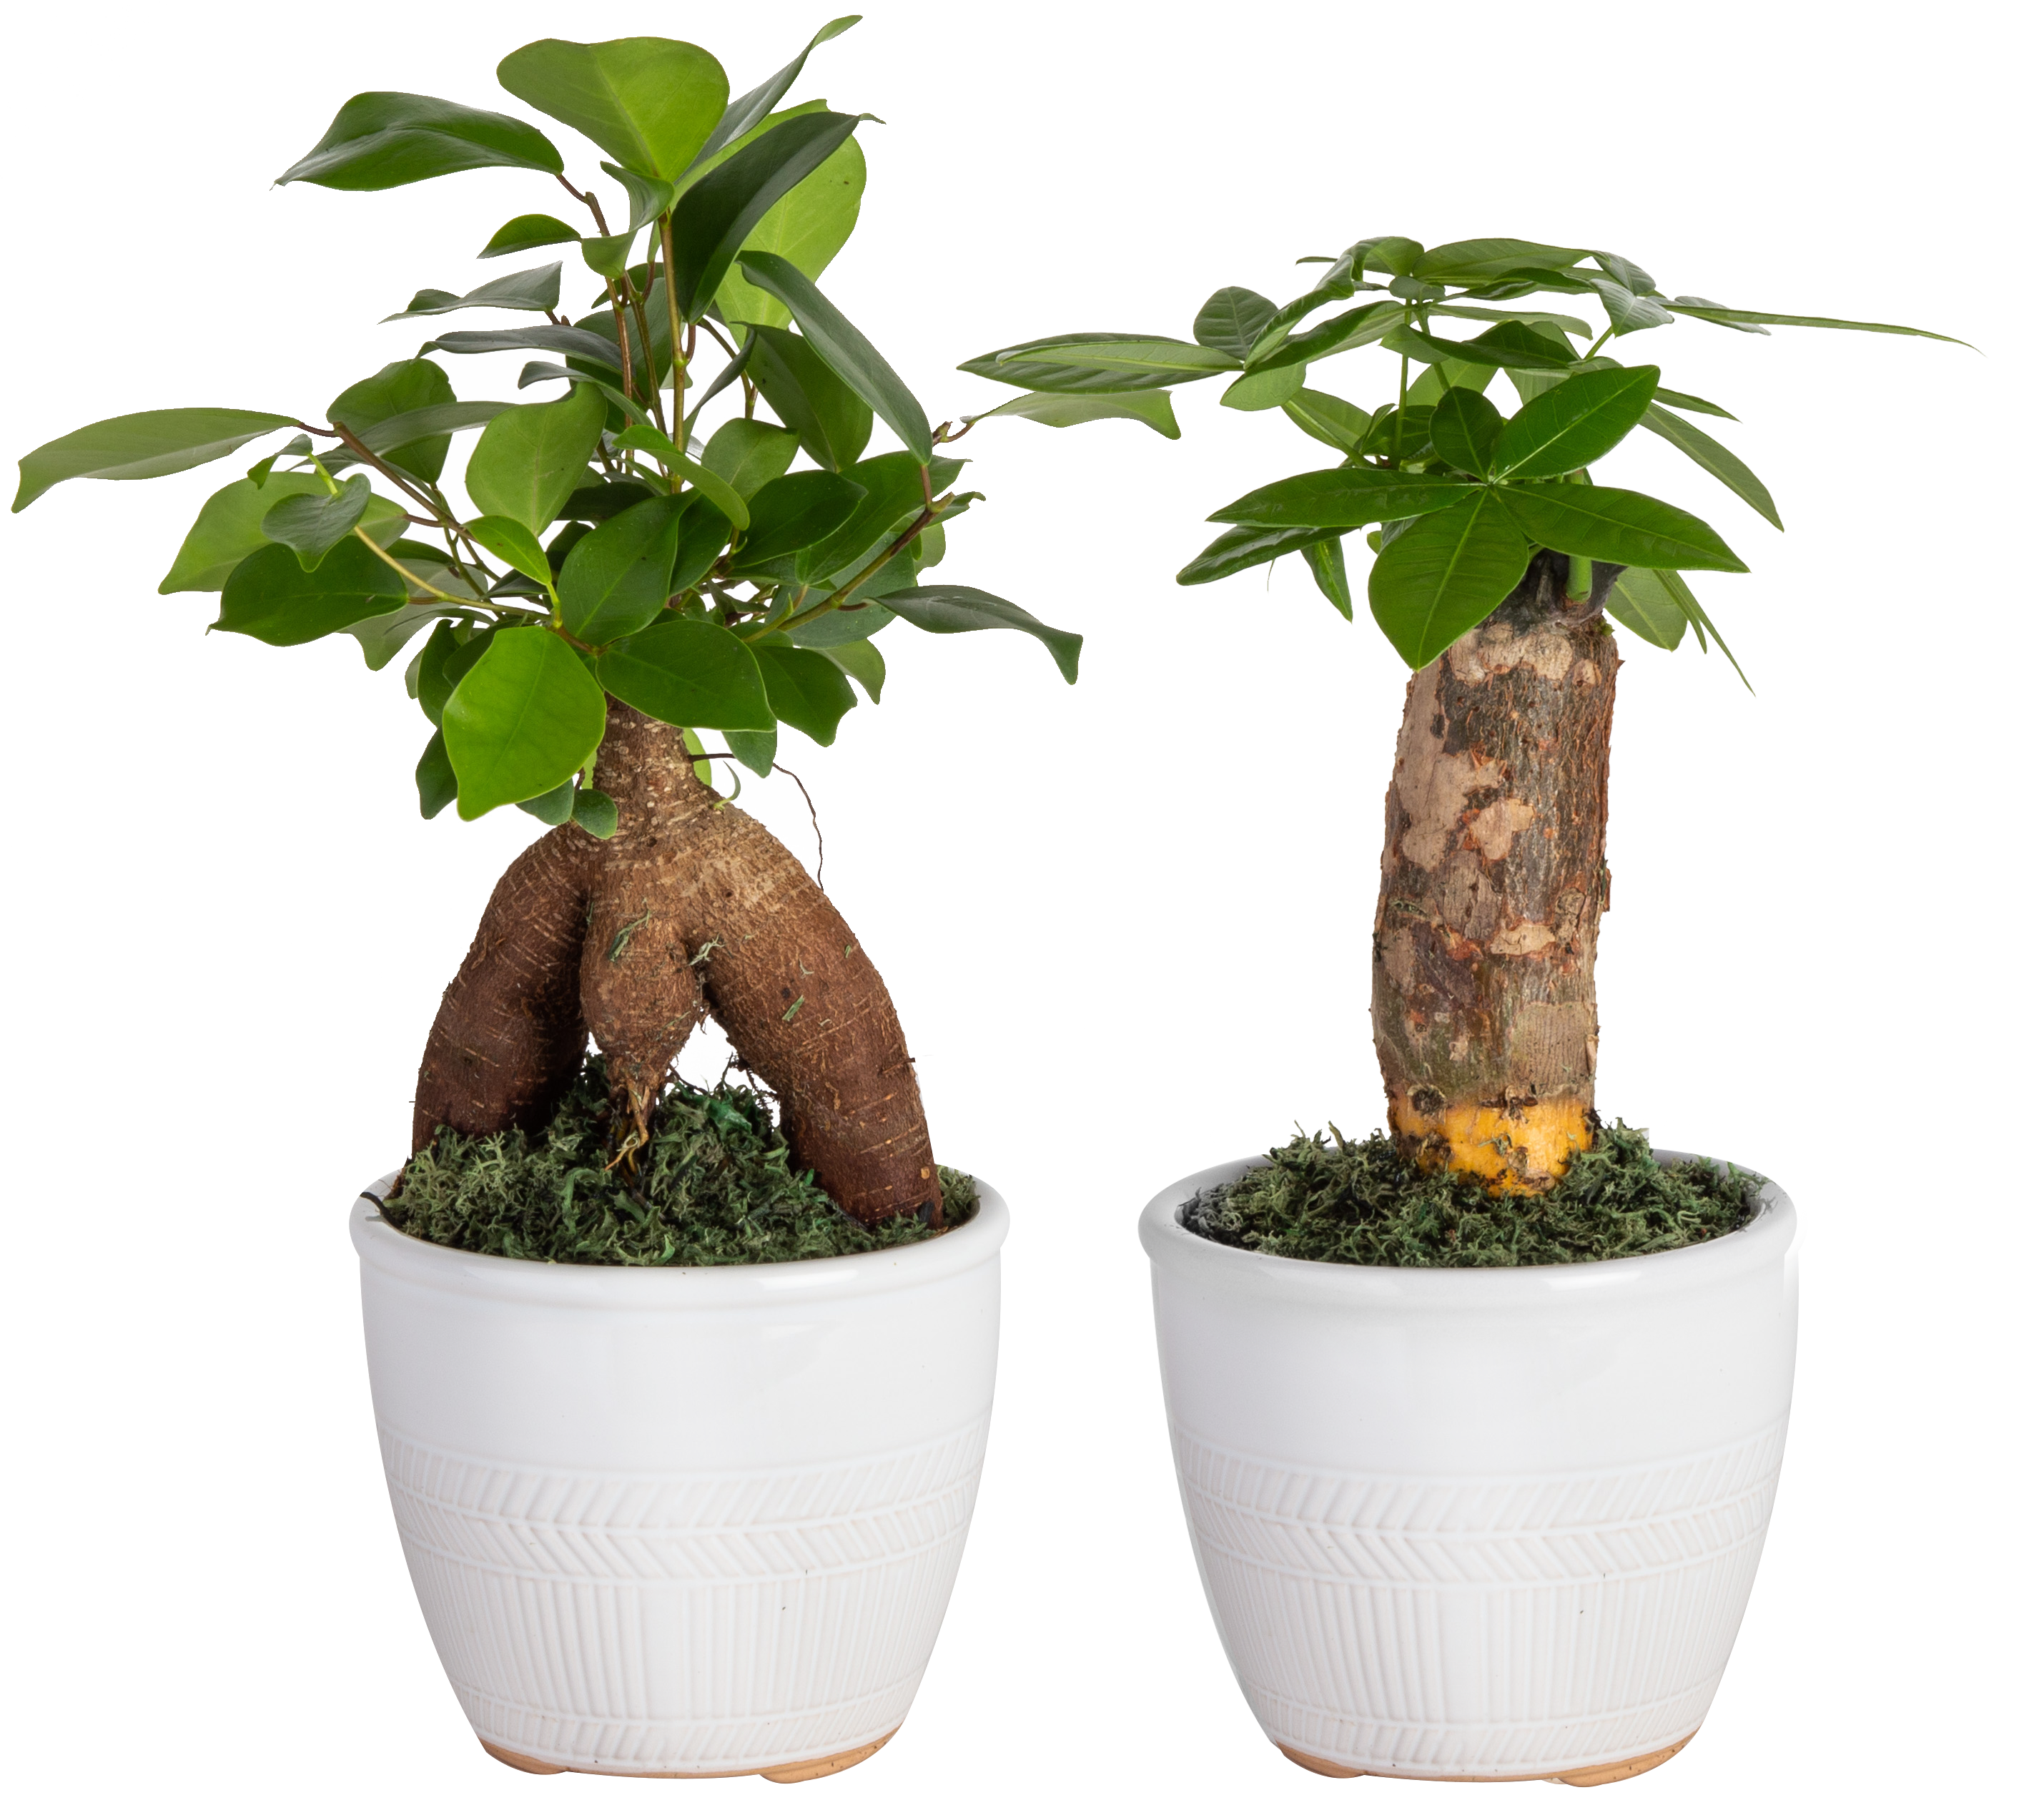 Costa Farms Ficus Ginseng and department Bonsai Planter Stump House House in Plants 2-Pack Plant the at Pachira in 5-in